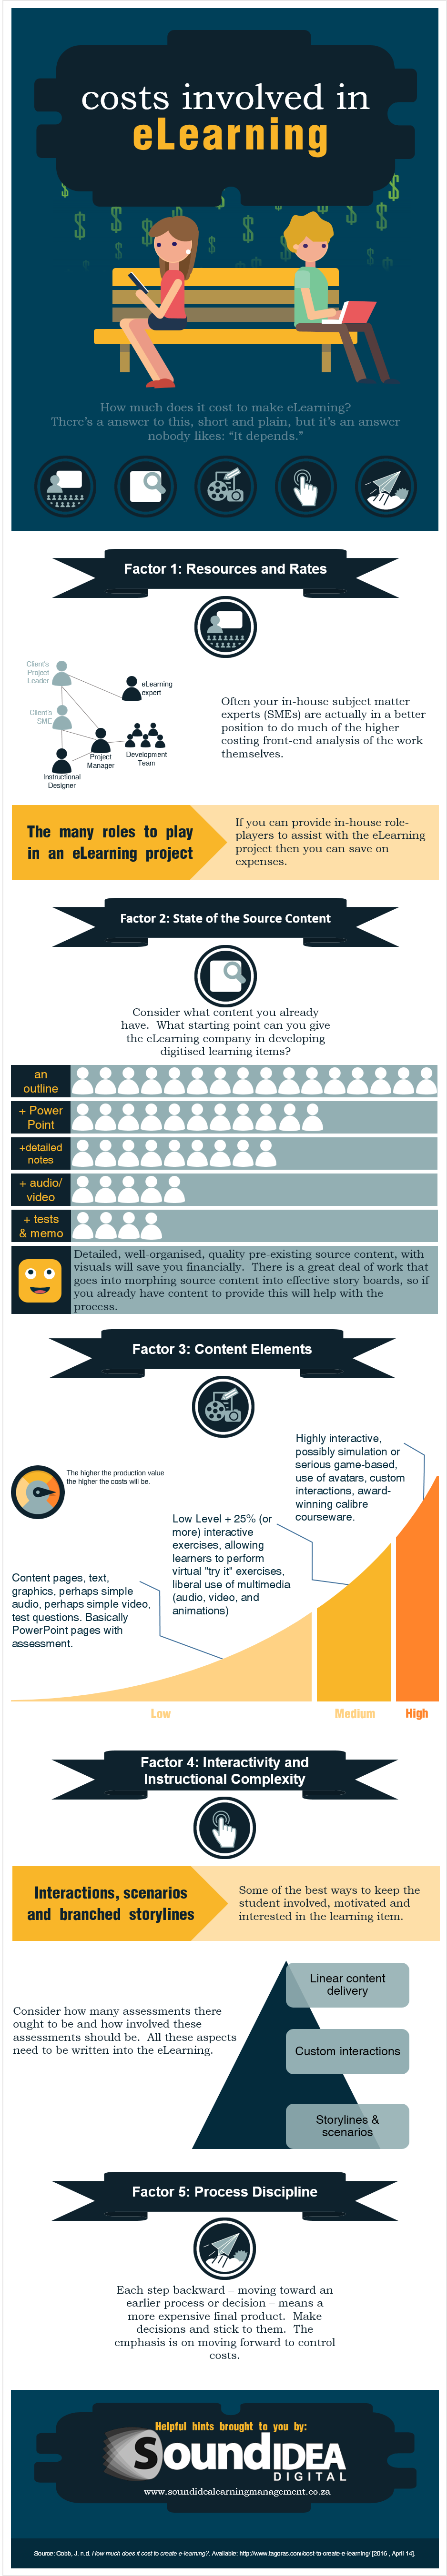 Infographic About Costs Involved in eLearning Projects